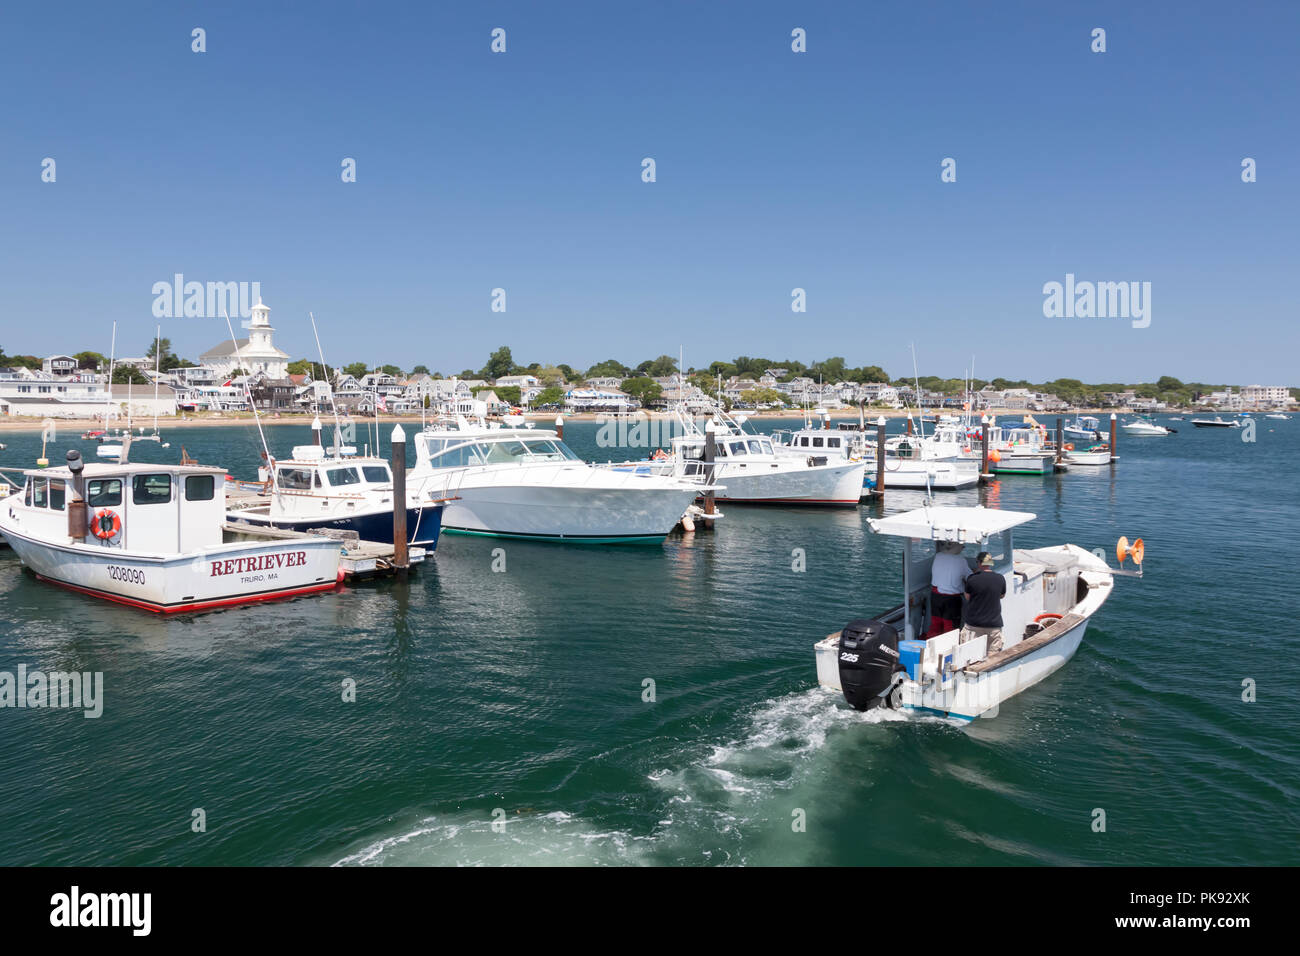 Boote angedockt an MacMillan Pier in Provincetown, Massachusetts, Cape Cod, USA. Stockfoto